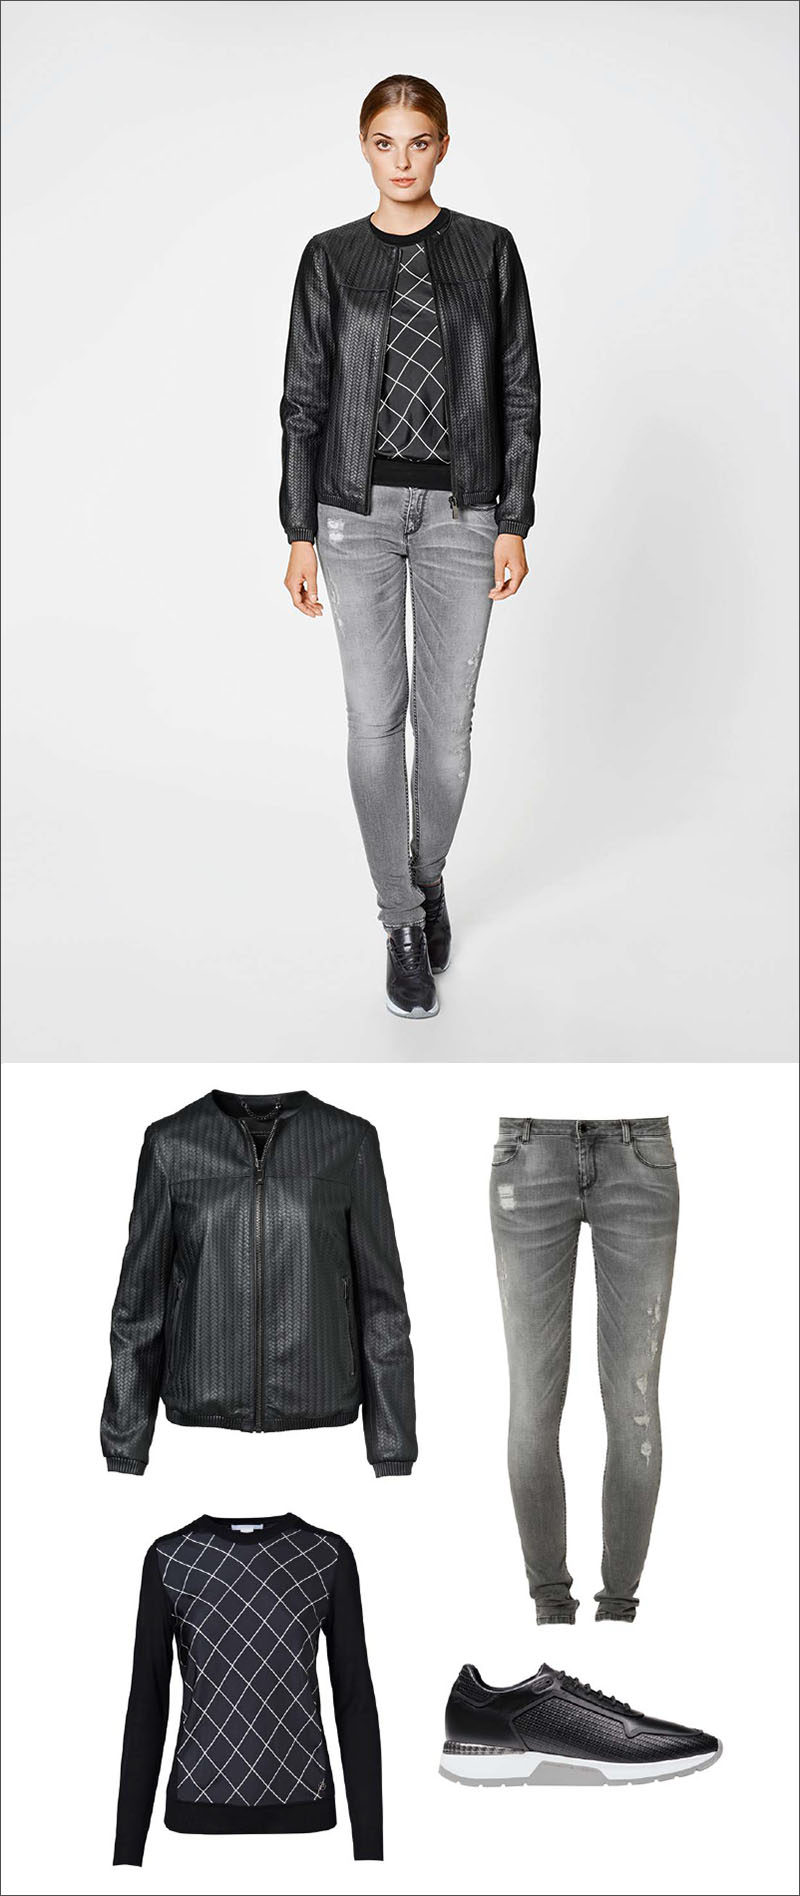 Women's Fashion Ideas - 12 Womens Outfits From Porsche Design's 2017 Spring/Summer Collection // This women's outfit has been made slightly edgier with a pair of ripped jeans, a knit sweater, a lightweight black jacket, and a pair of black, white, and grey sneakers.